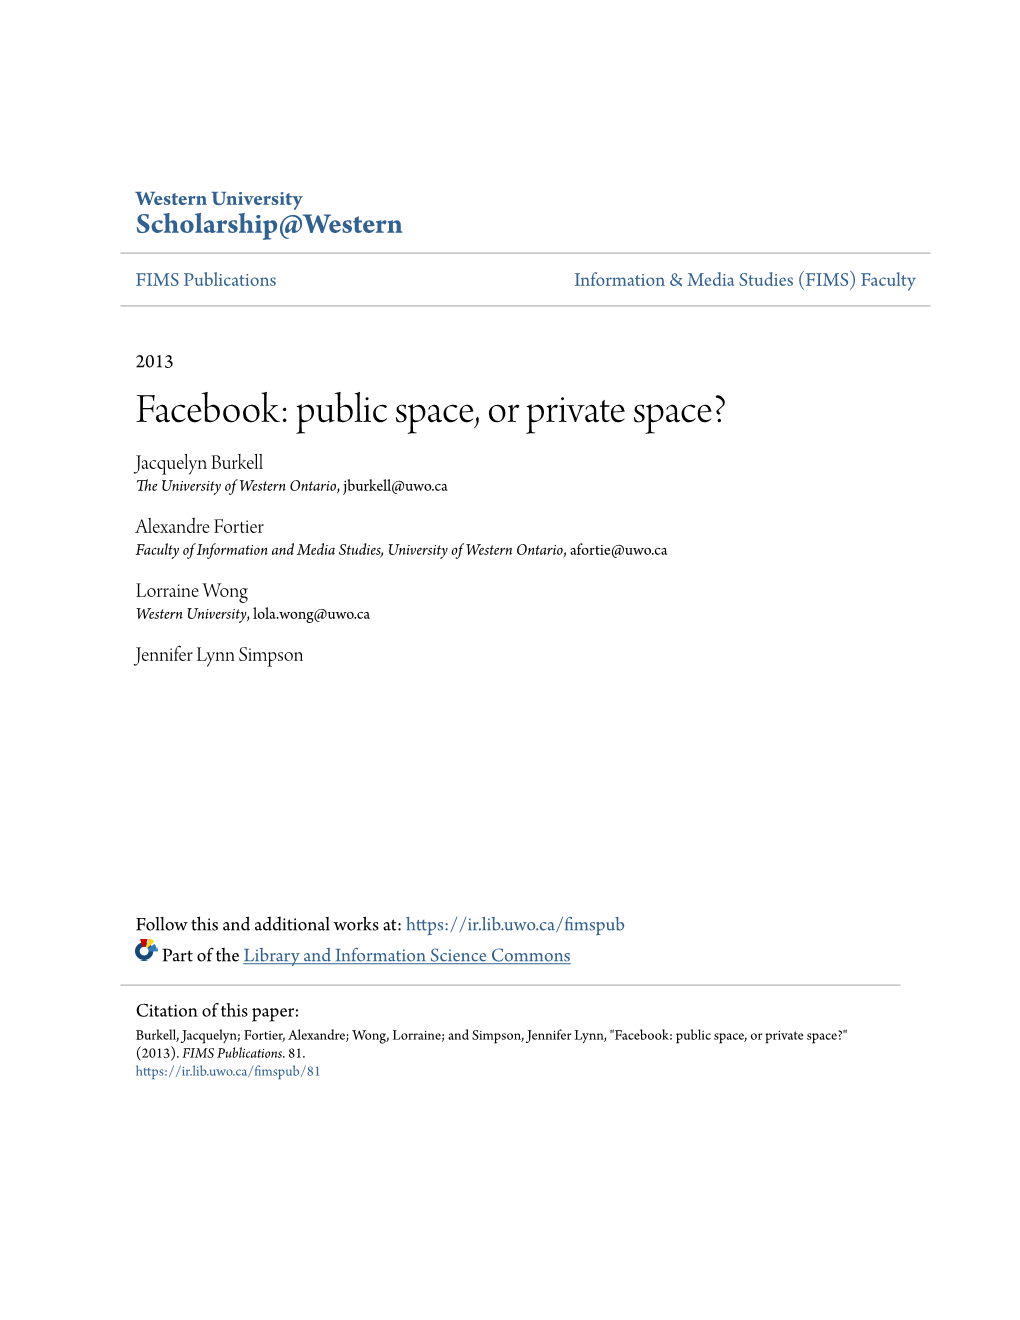 Facebook: Public Space, Or Private Space? Jacquelyn Burkell the University of Western Ontario, Jburkell@Uwo.Ca